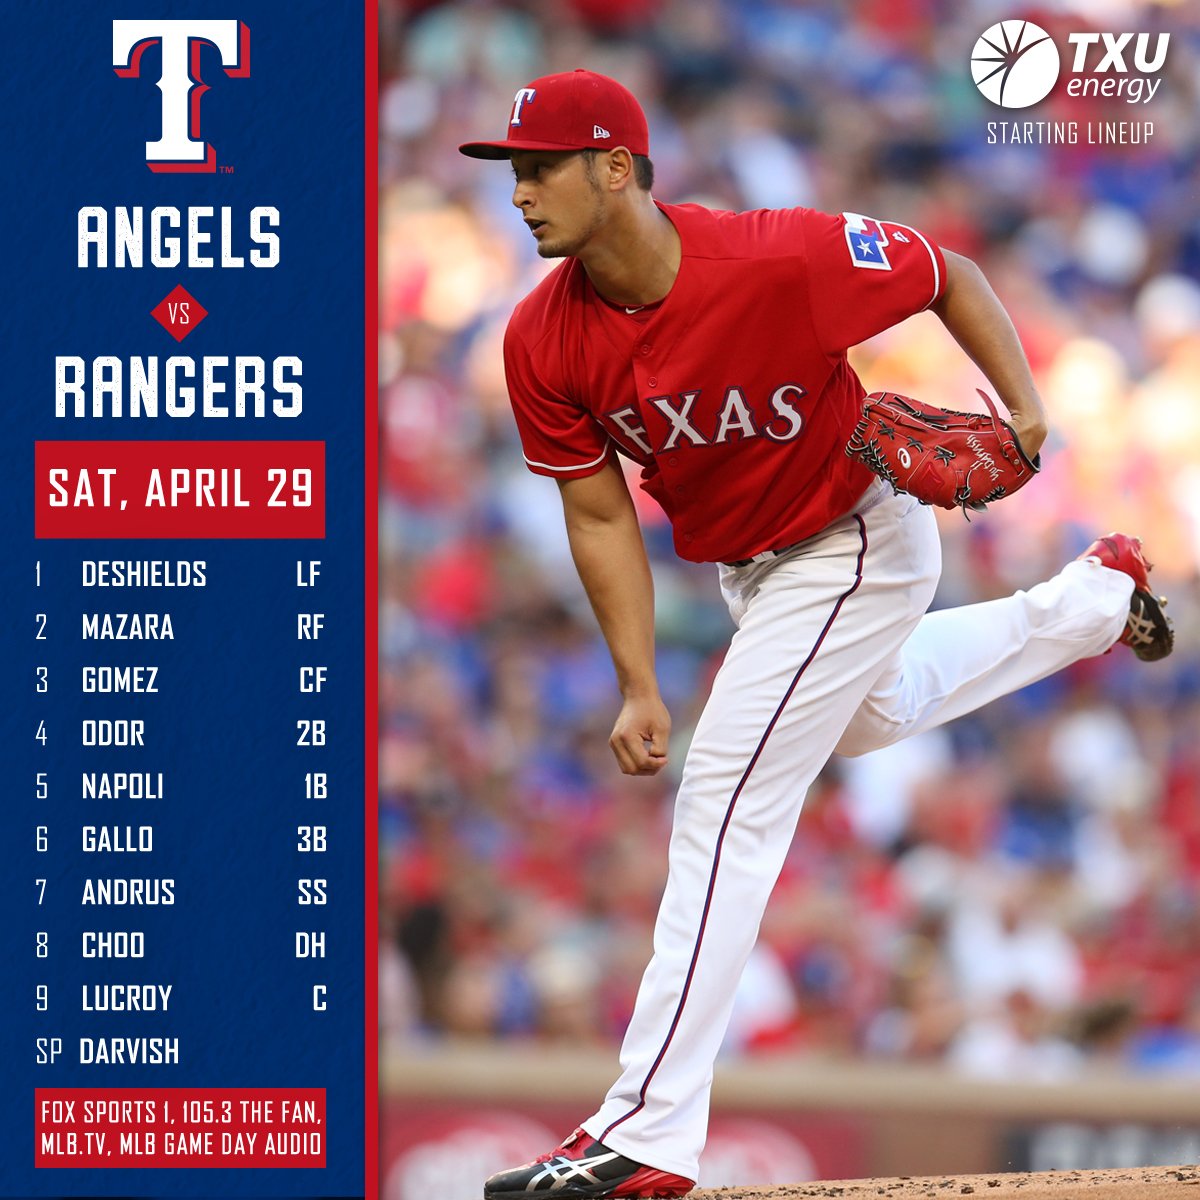 Darvish is on the bump tonight with first pitch at 6:15 pm on FS1. Game Preview:  atmlb.com/2qqGn5Z https://t.co/07v9ht9Xco